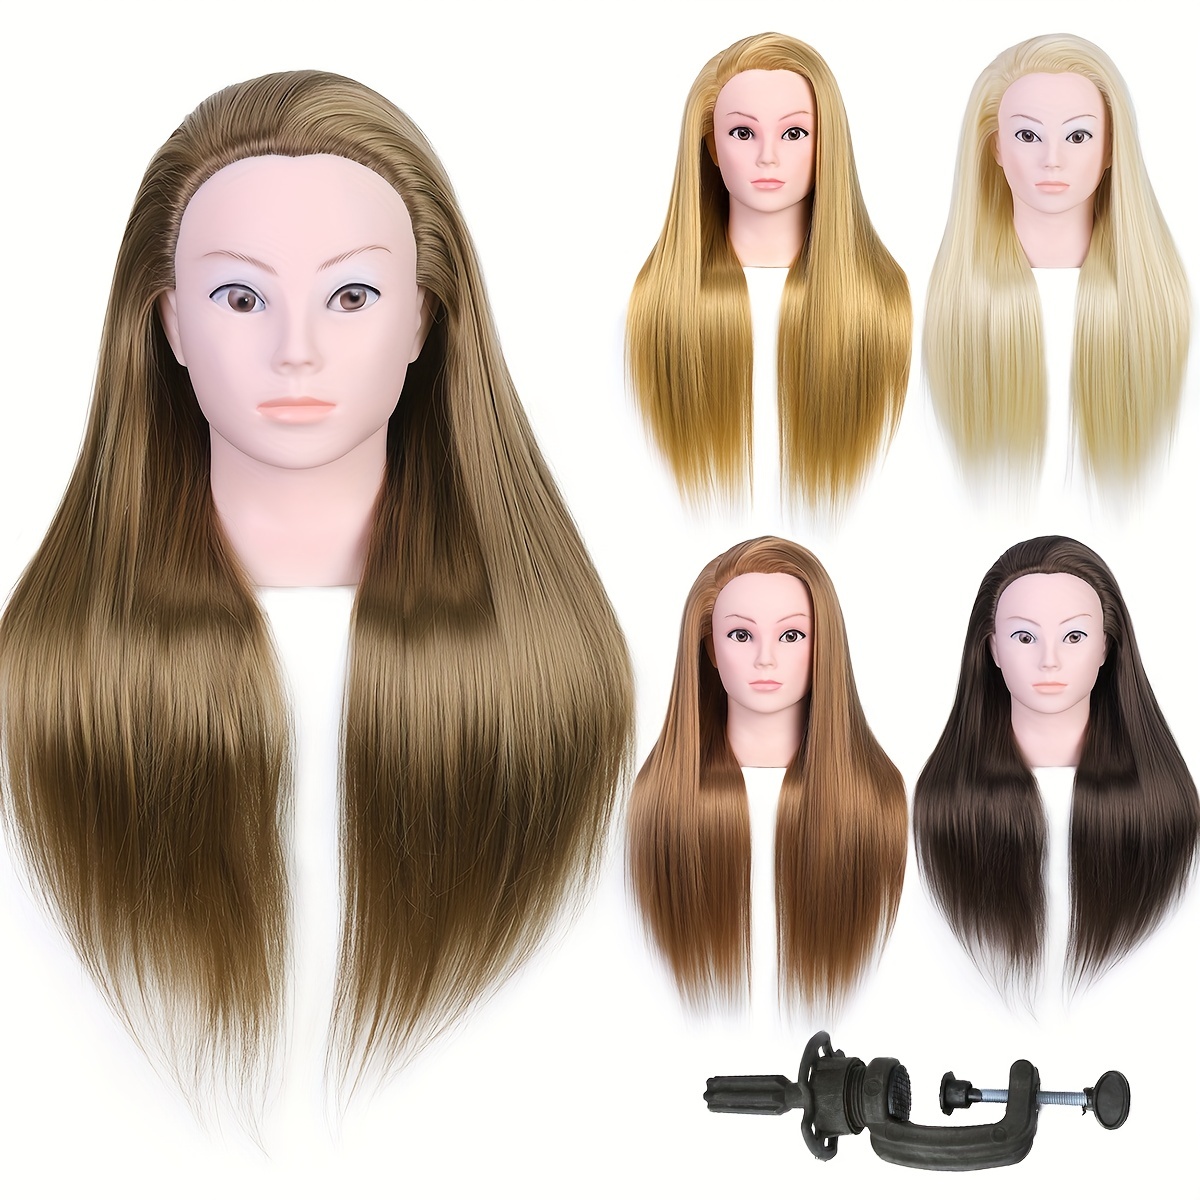 Blonde Mannequin Head With 80% Human Hair For Hairstyles